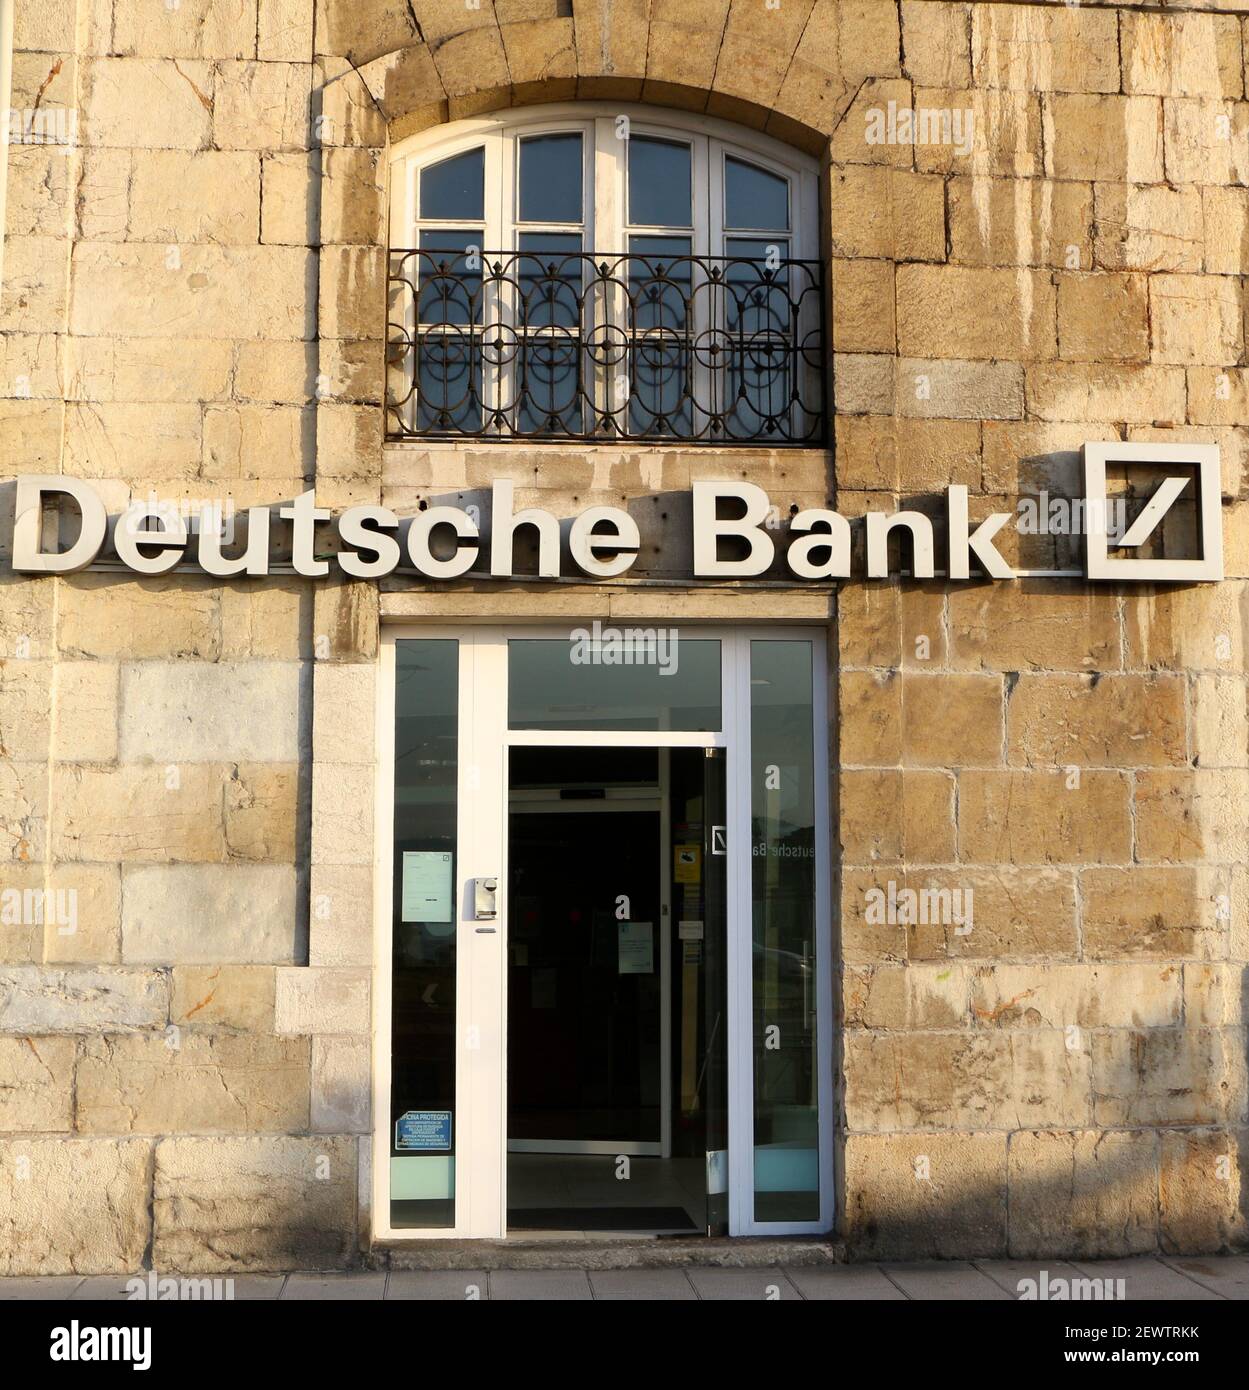 Wall sign and graphic symbol for German Deutsche Bank branch over the  entrance on the Paseo de Pereda Santander Cantabria Spain Stock Photo -  Alamy